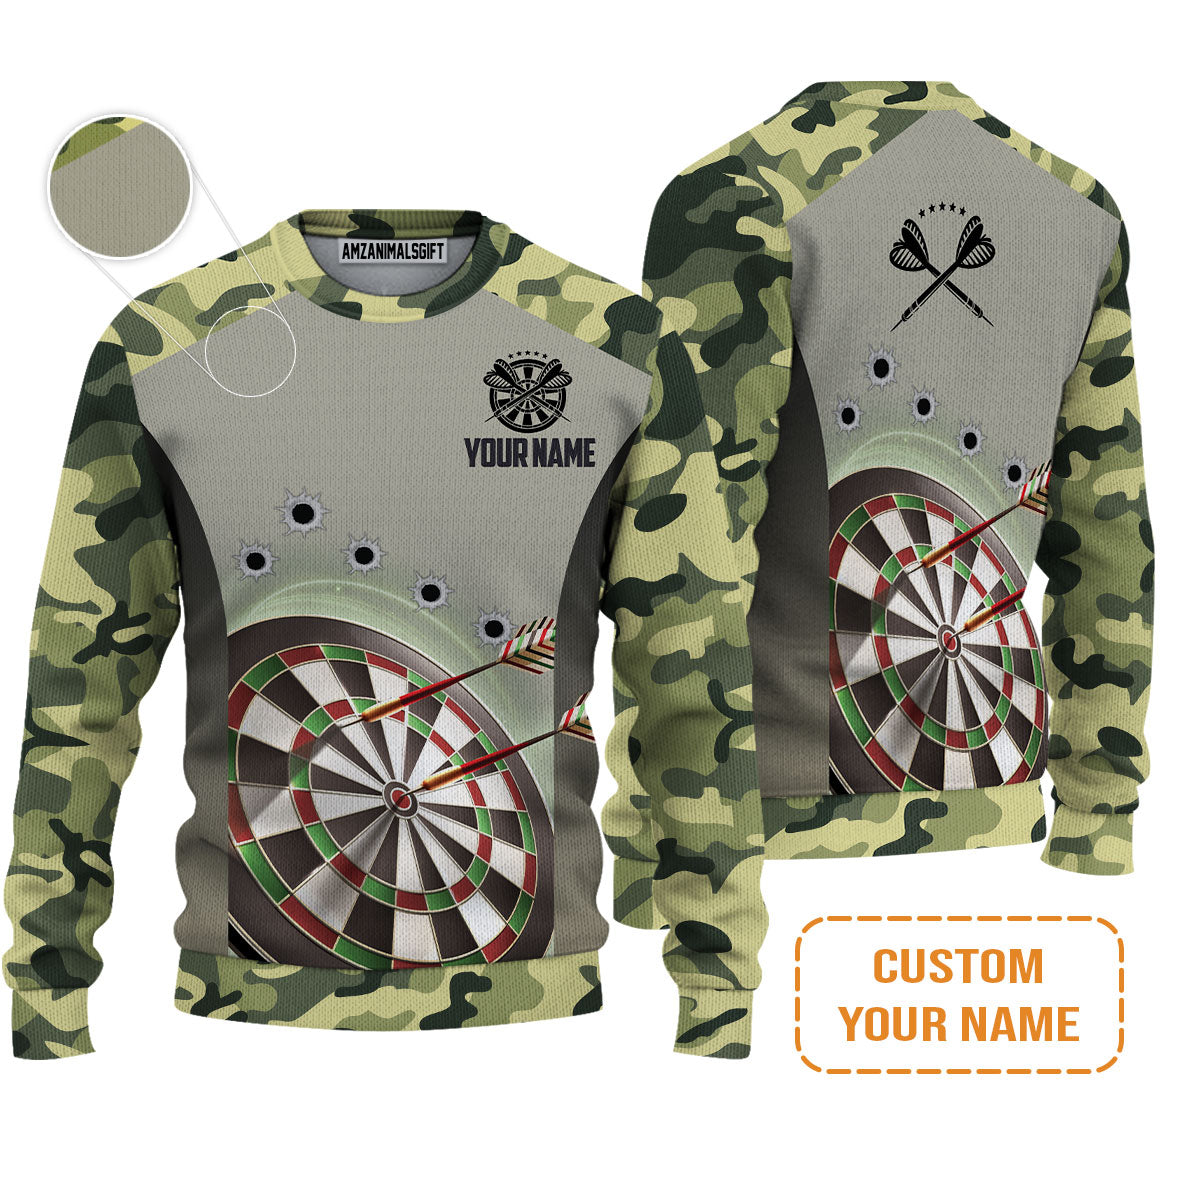 Customized Name Darts Sweater, Camo Pattern Personalized Darts Sweater - Perfect Gift For Darts Lovers